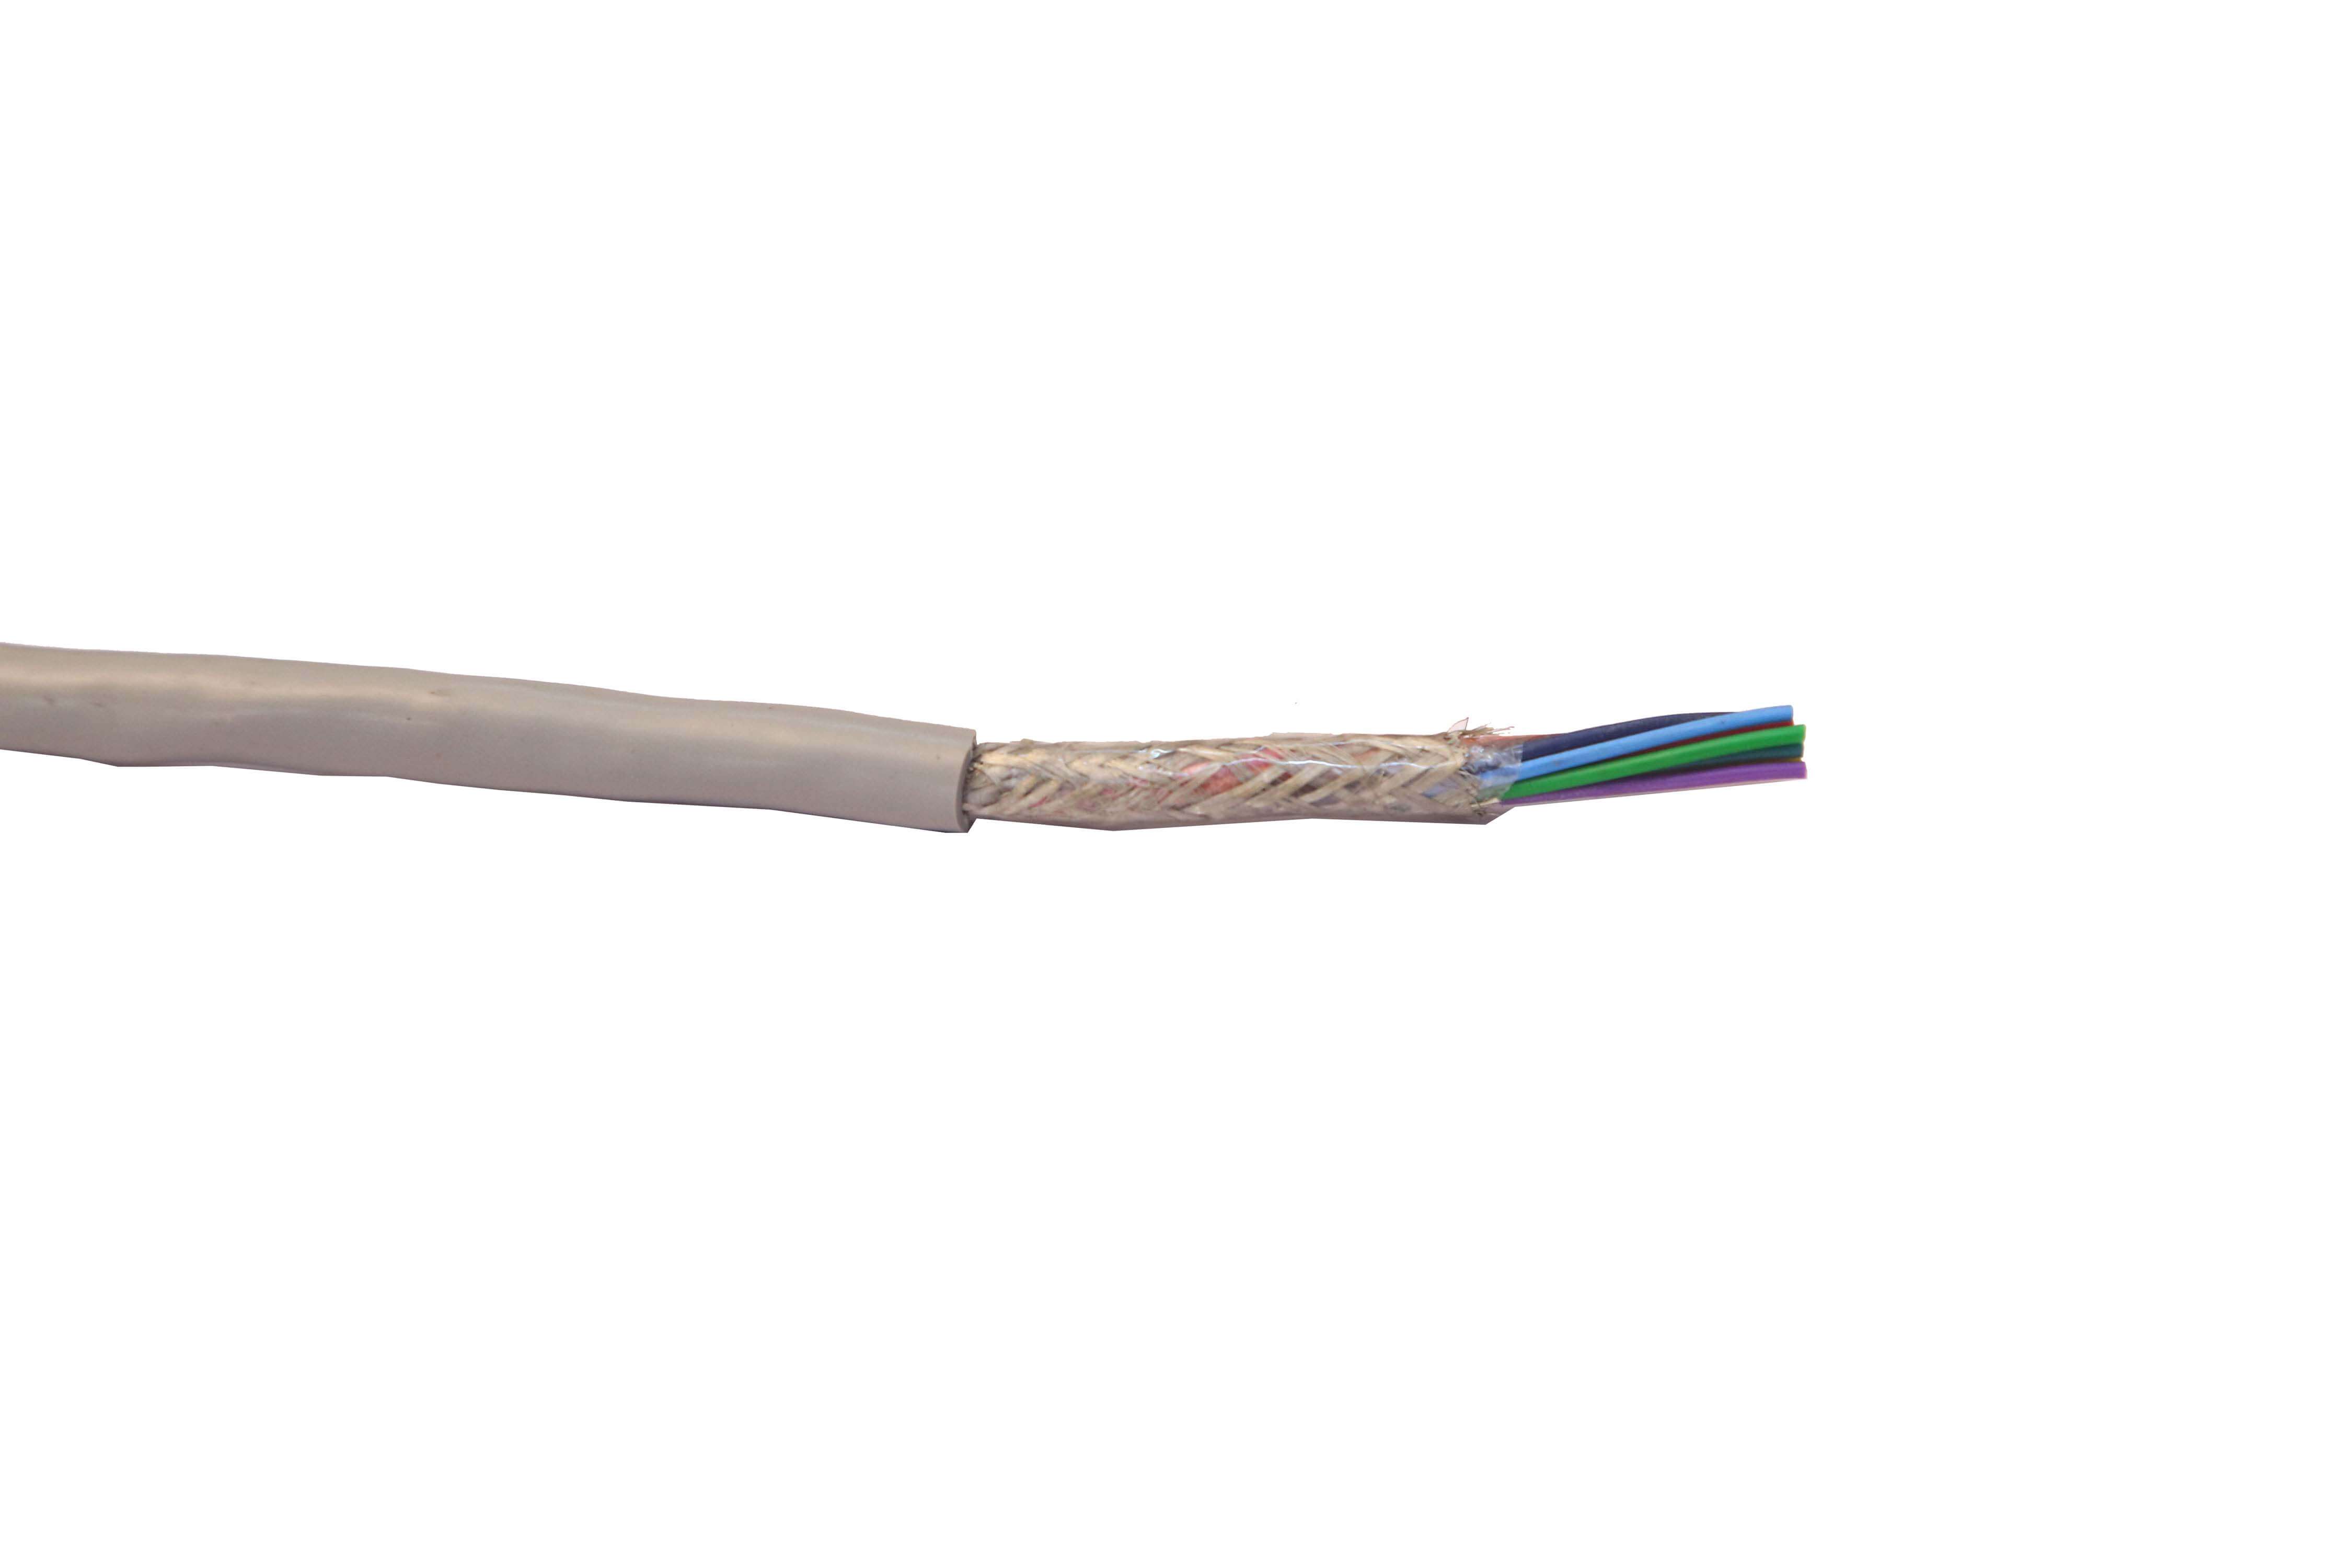 Individual and Overall Shielded Cables in India